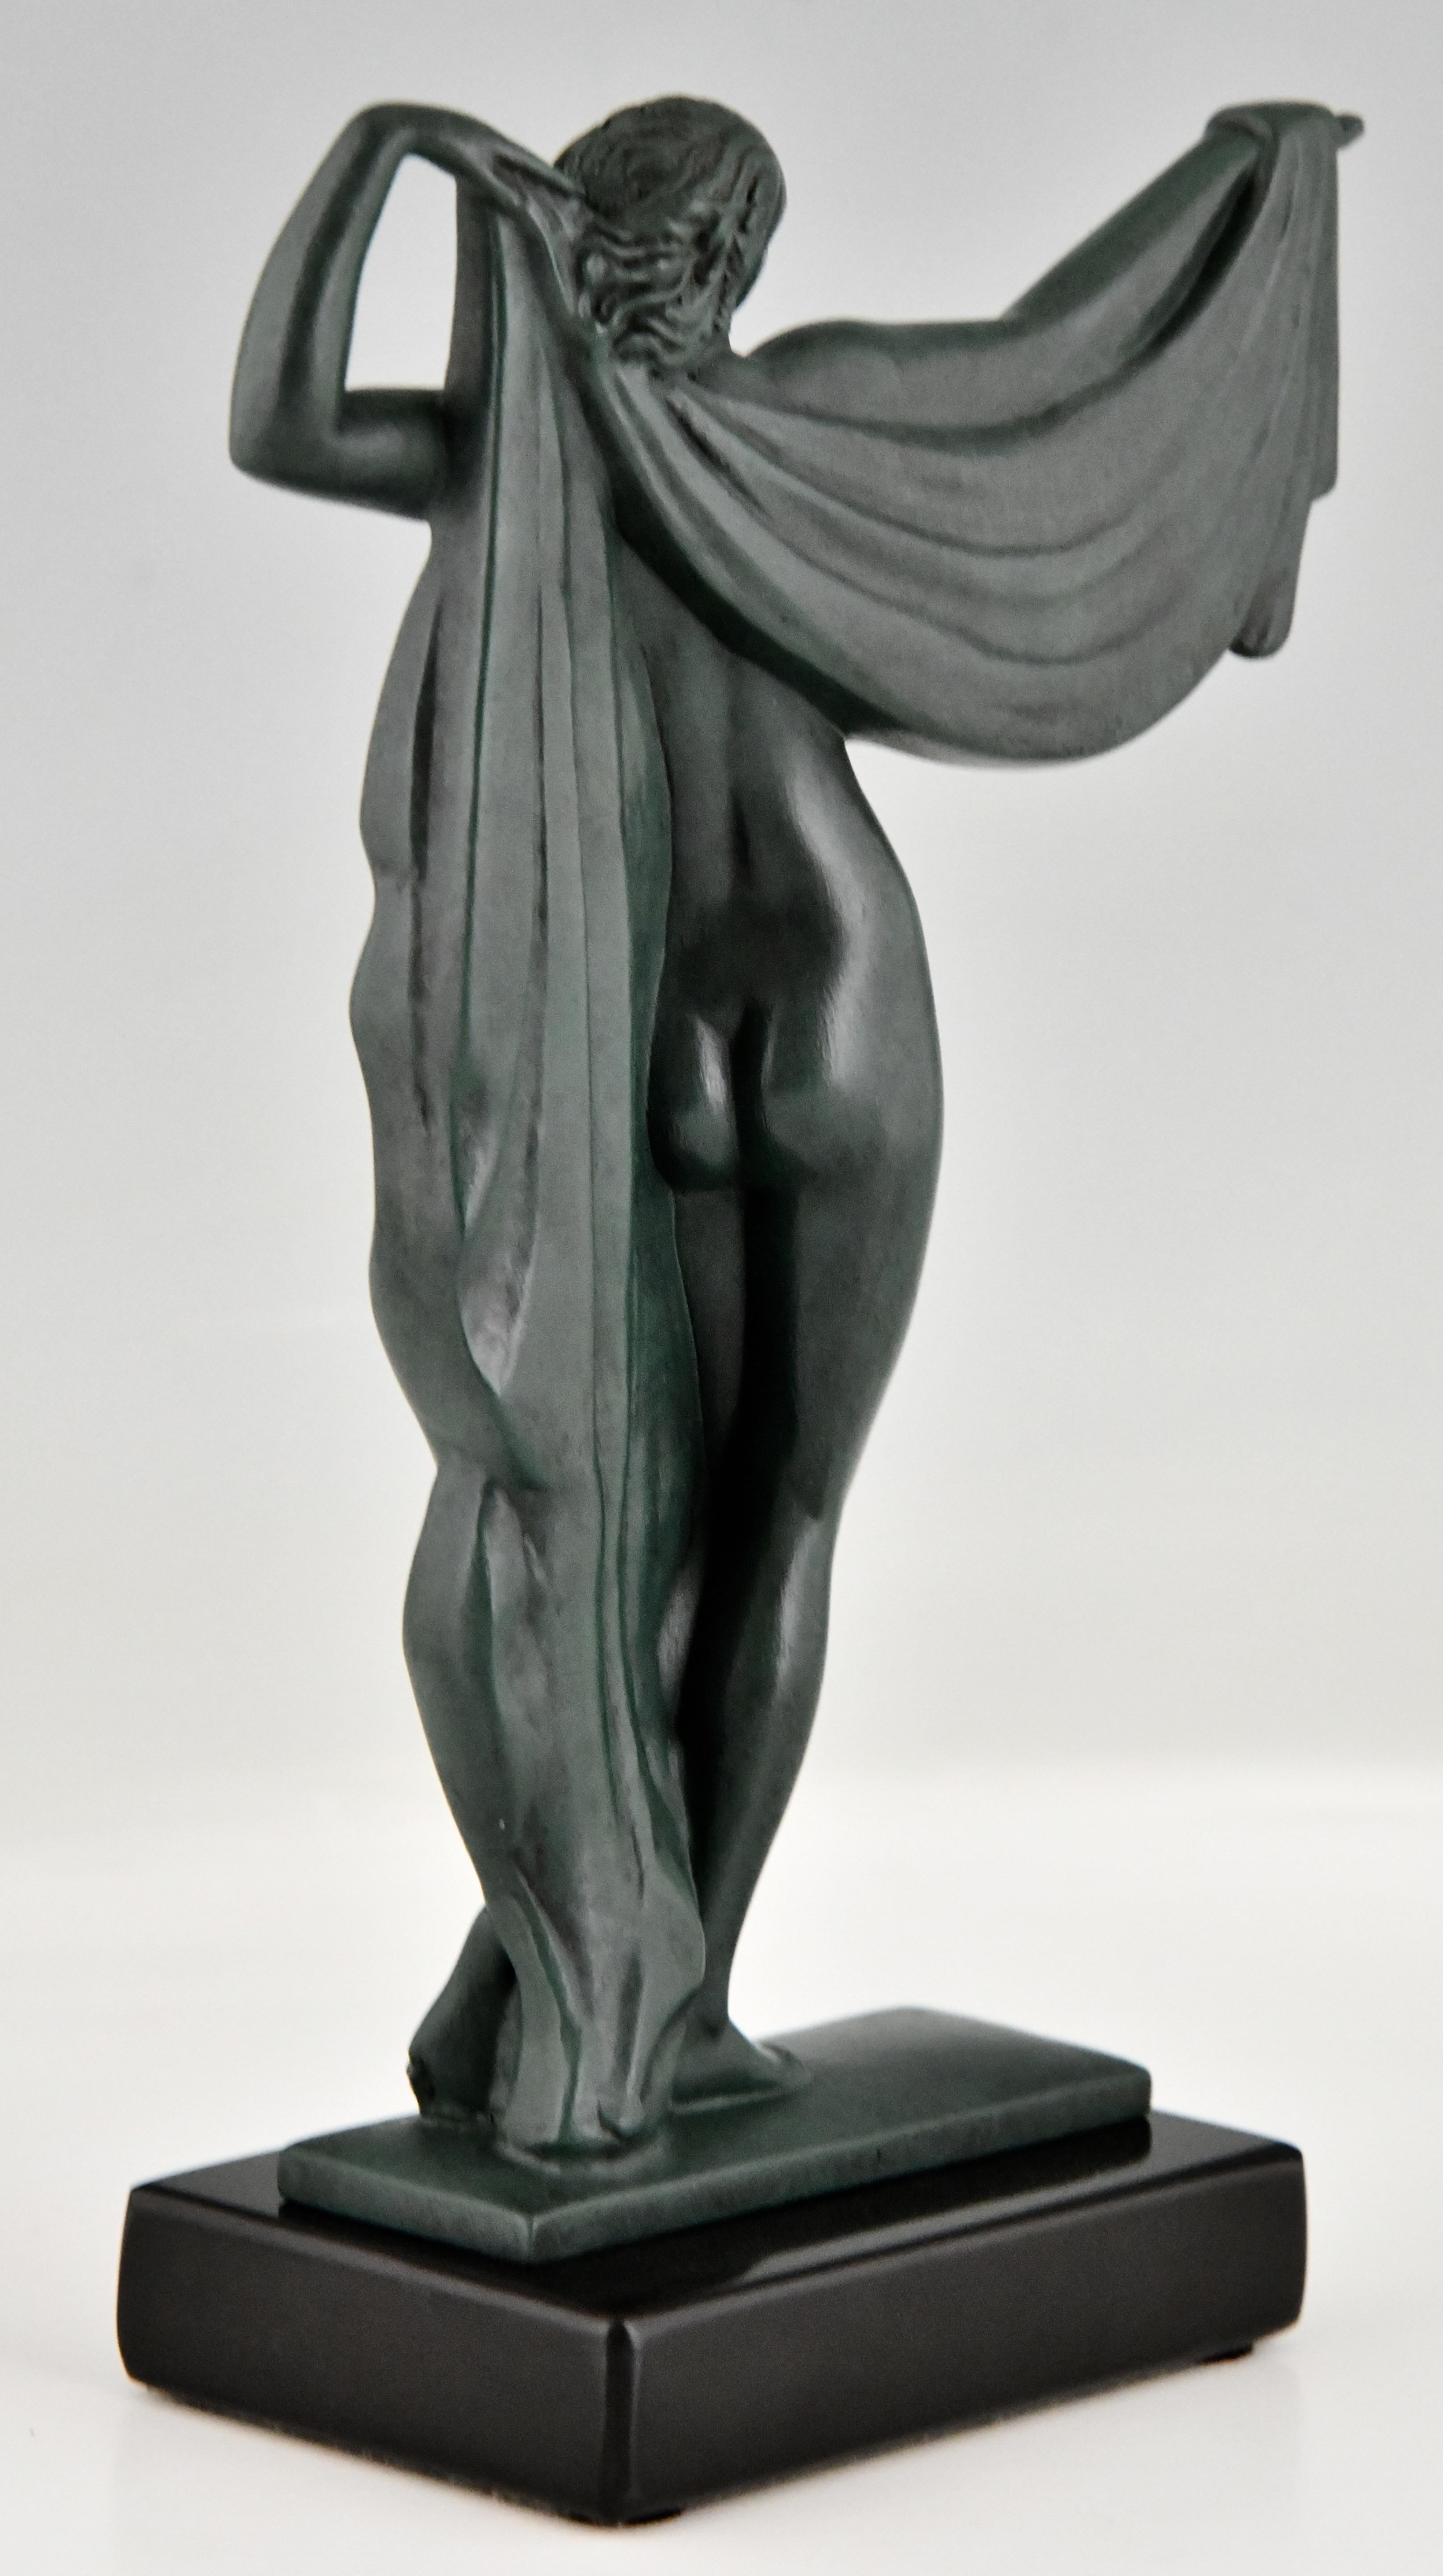 Patinated Art Deco Sculpture Bathing Nude Venus by Fayral Max Le Verrier, France, 1930